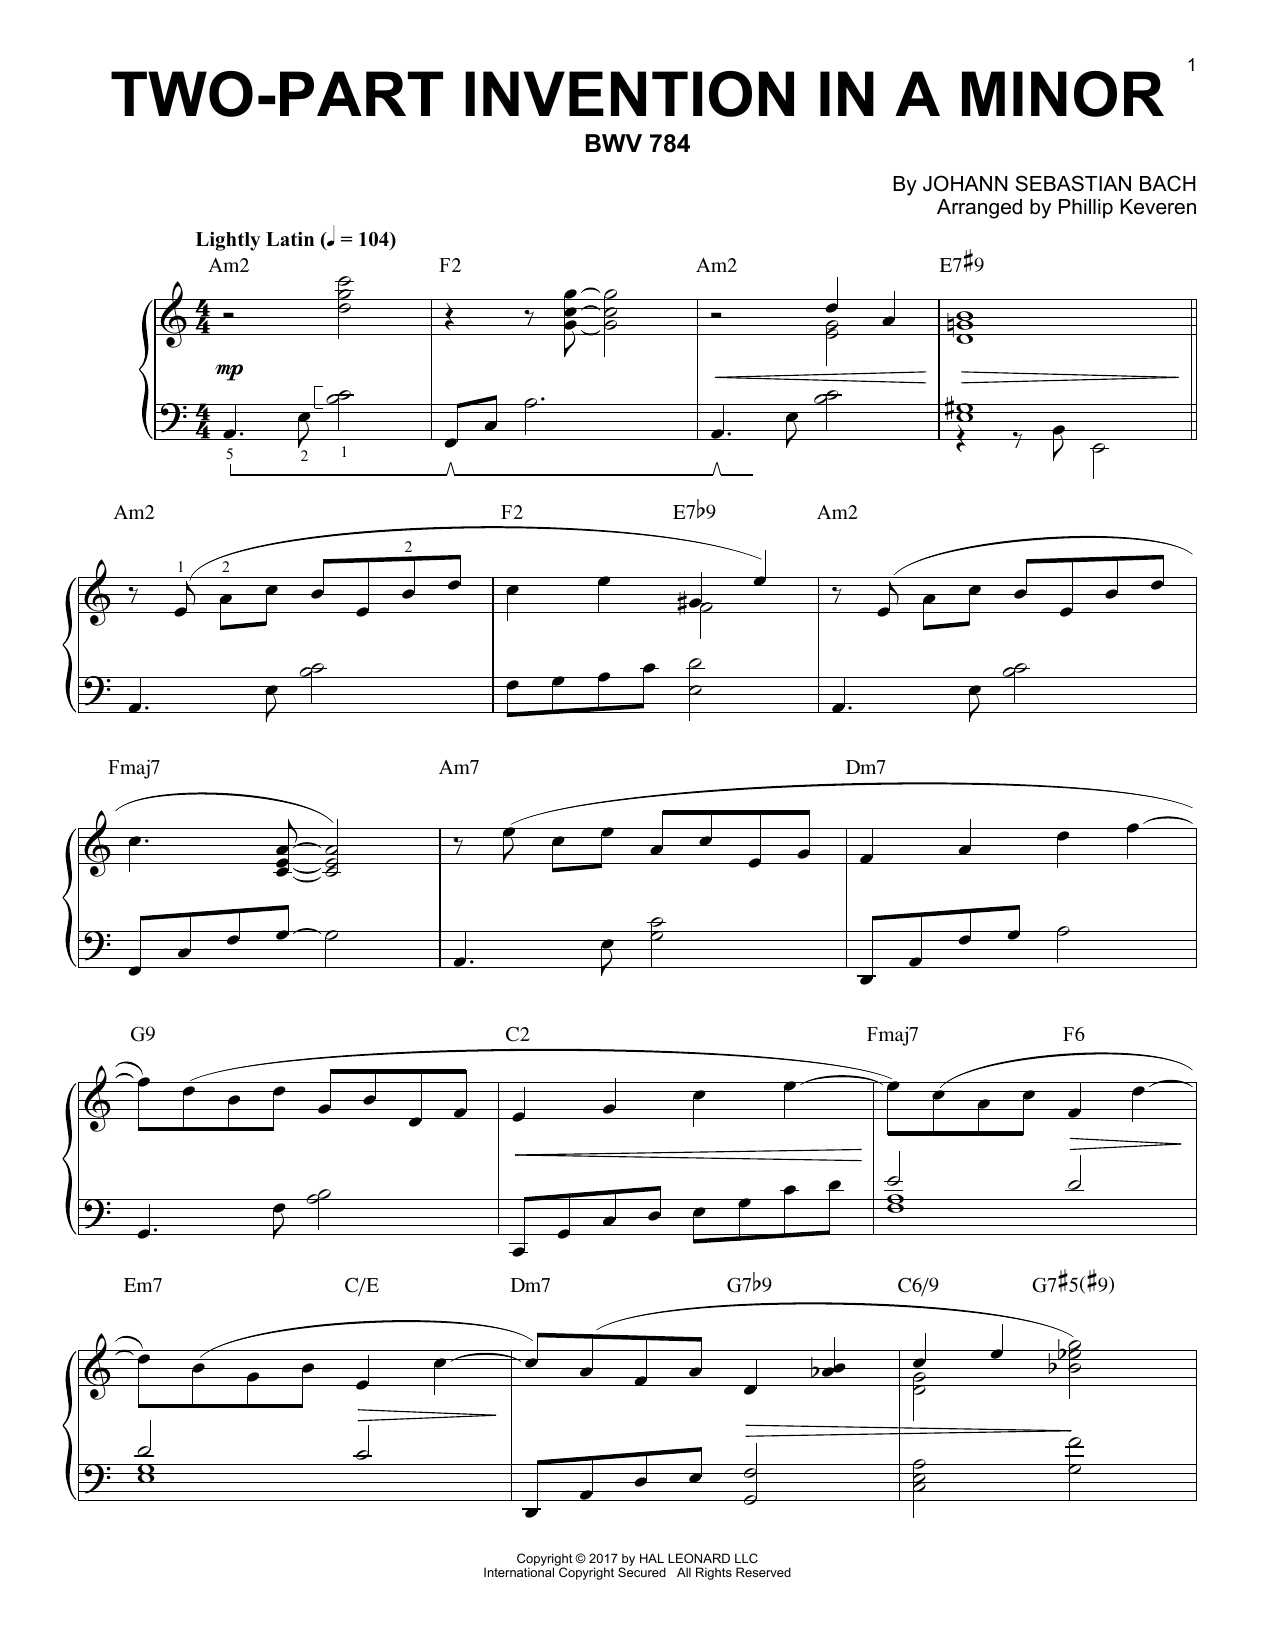 Download Johann Sebastian Bach Two-Part Invention In A Minor, BWV 784 Sheet Music